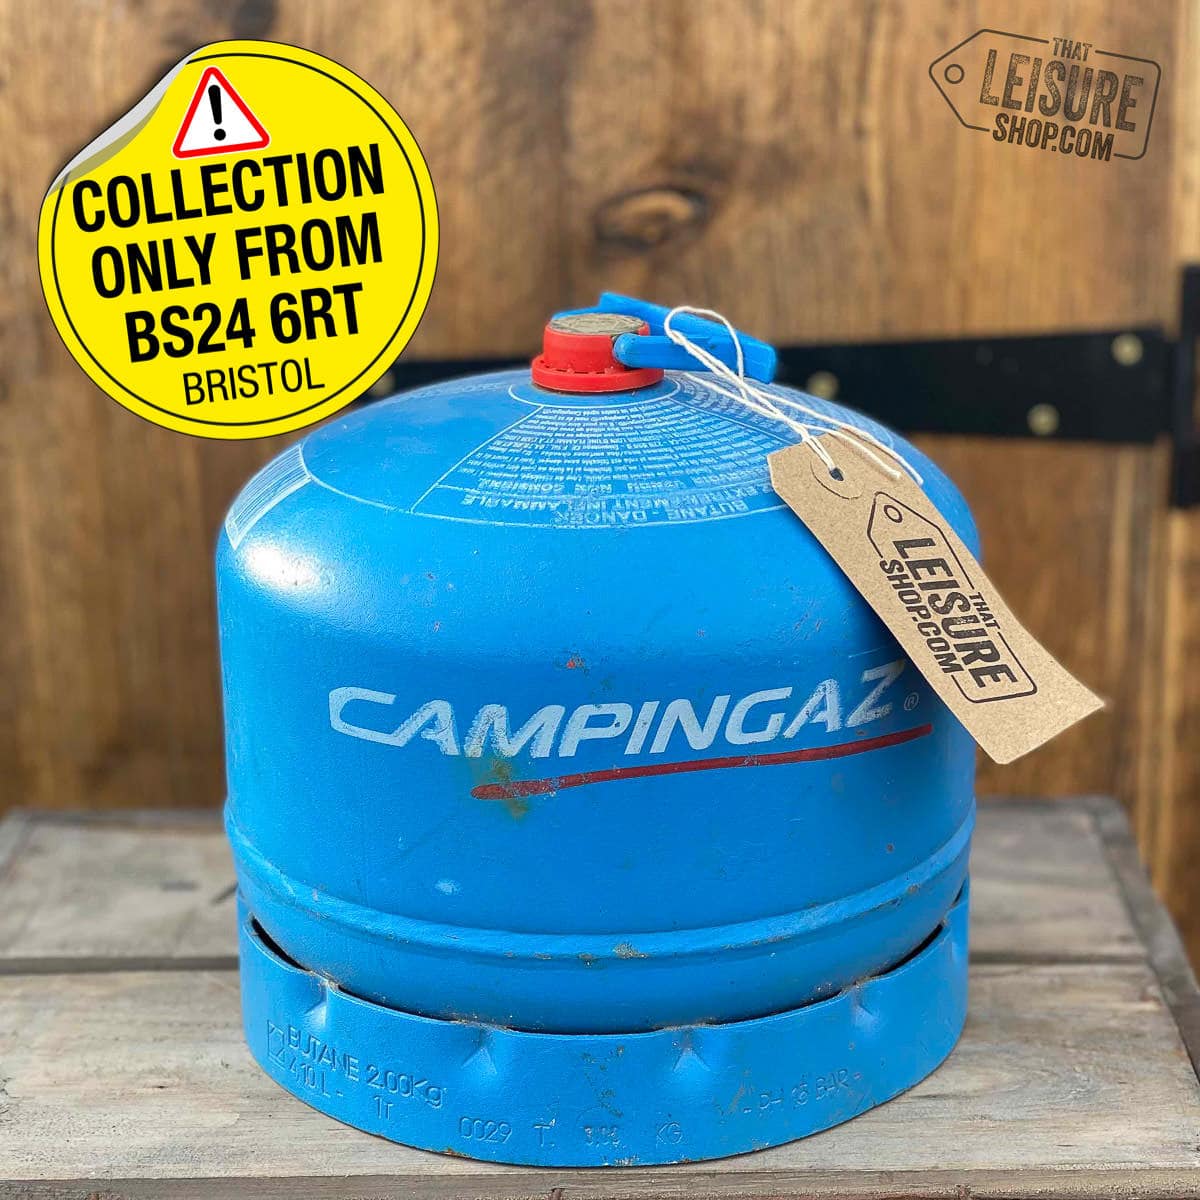 Campingaz 904 Gas Bottle – Collection Only